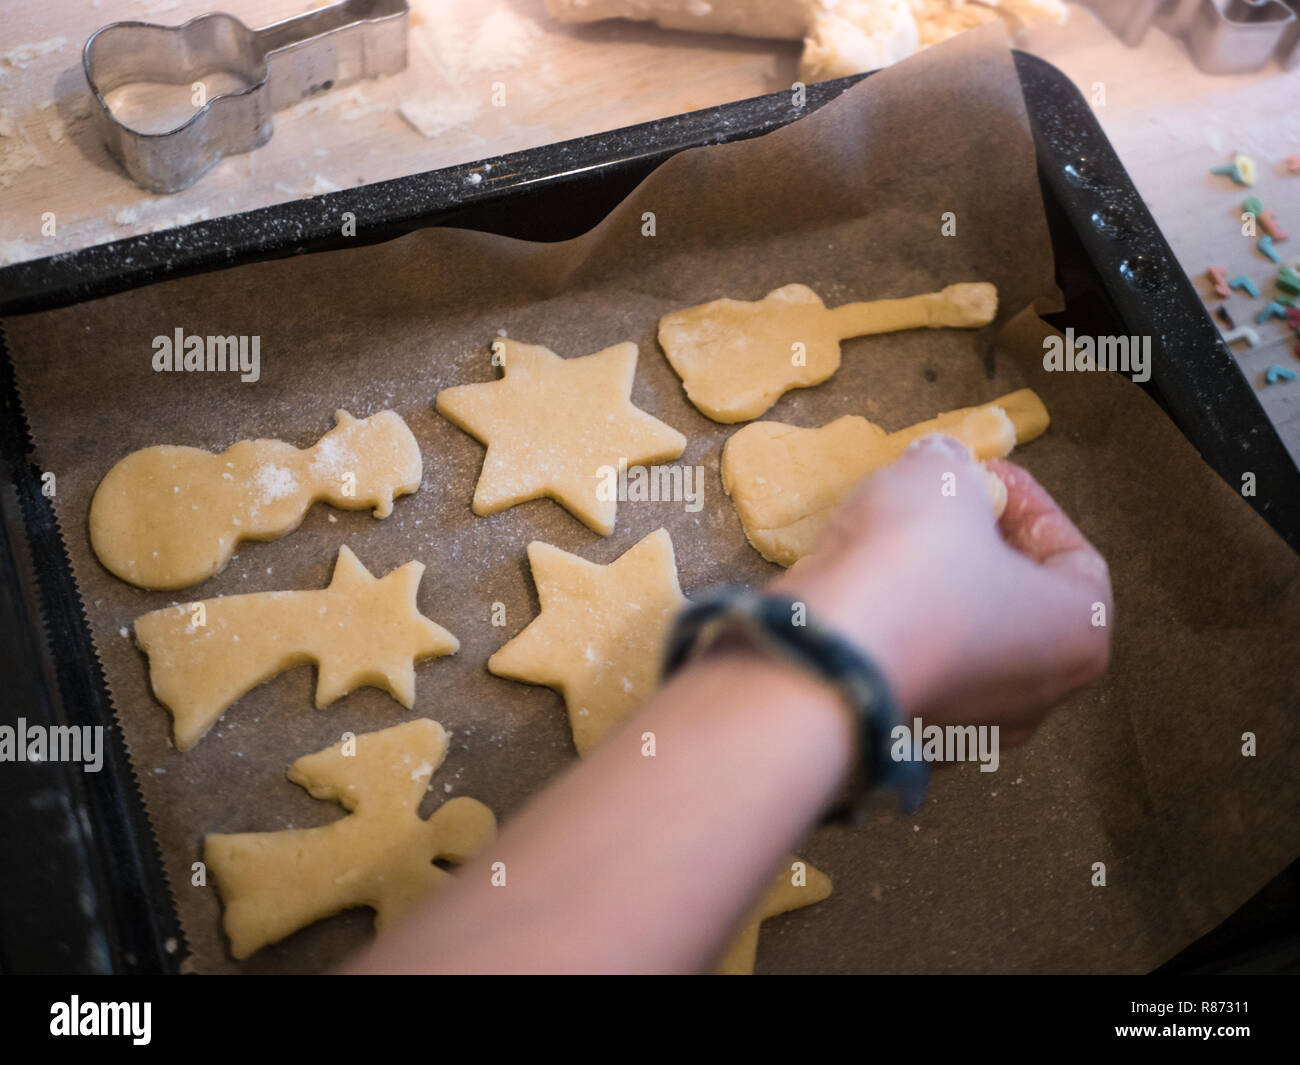 Christmas Bakery: Little girl putting different shapes of cookie dough on a baking tray - snowman, star, guitar, angel Stock Photo